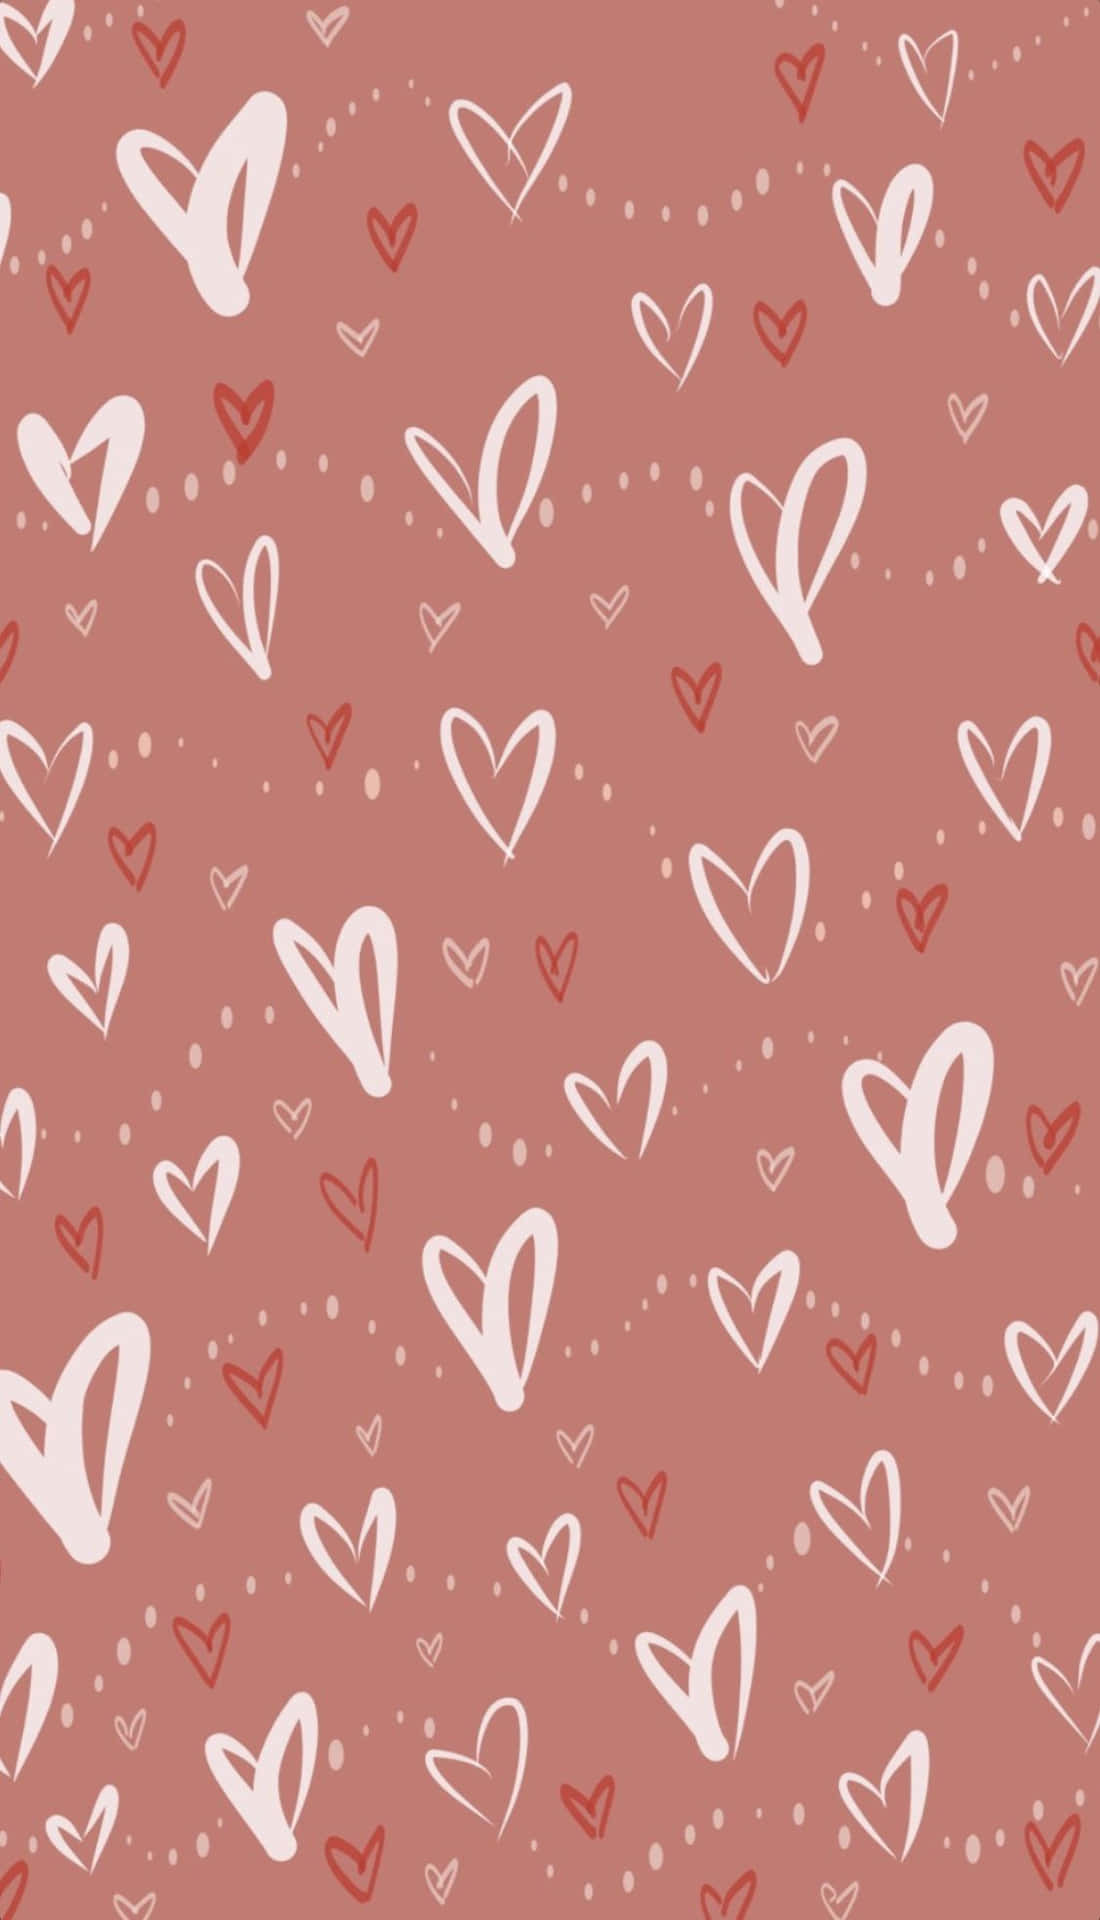 Send your loved one a Valentine's Day message right from your phone! Wallpaper